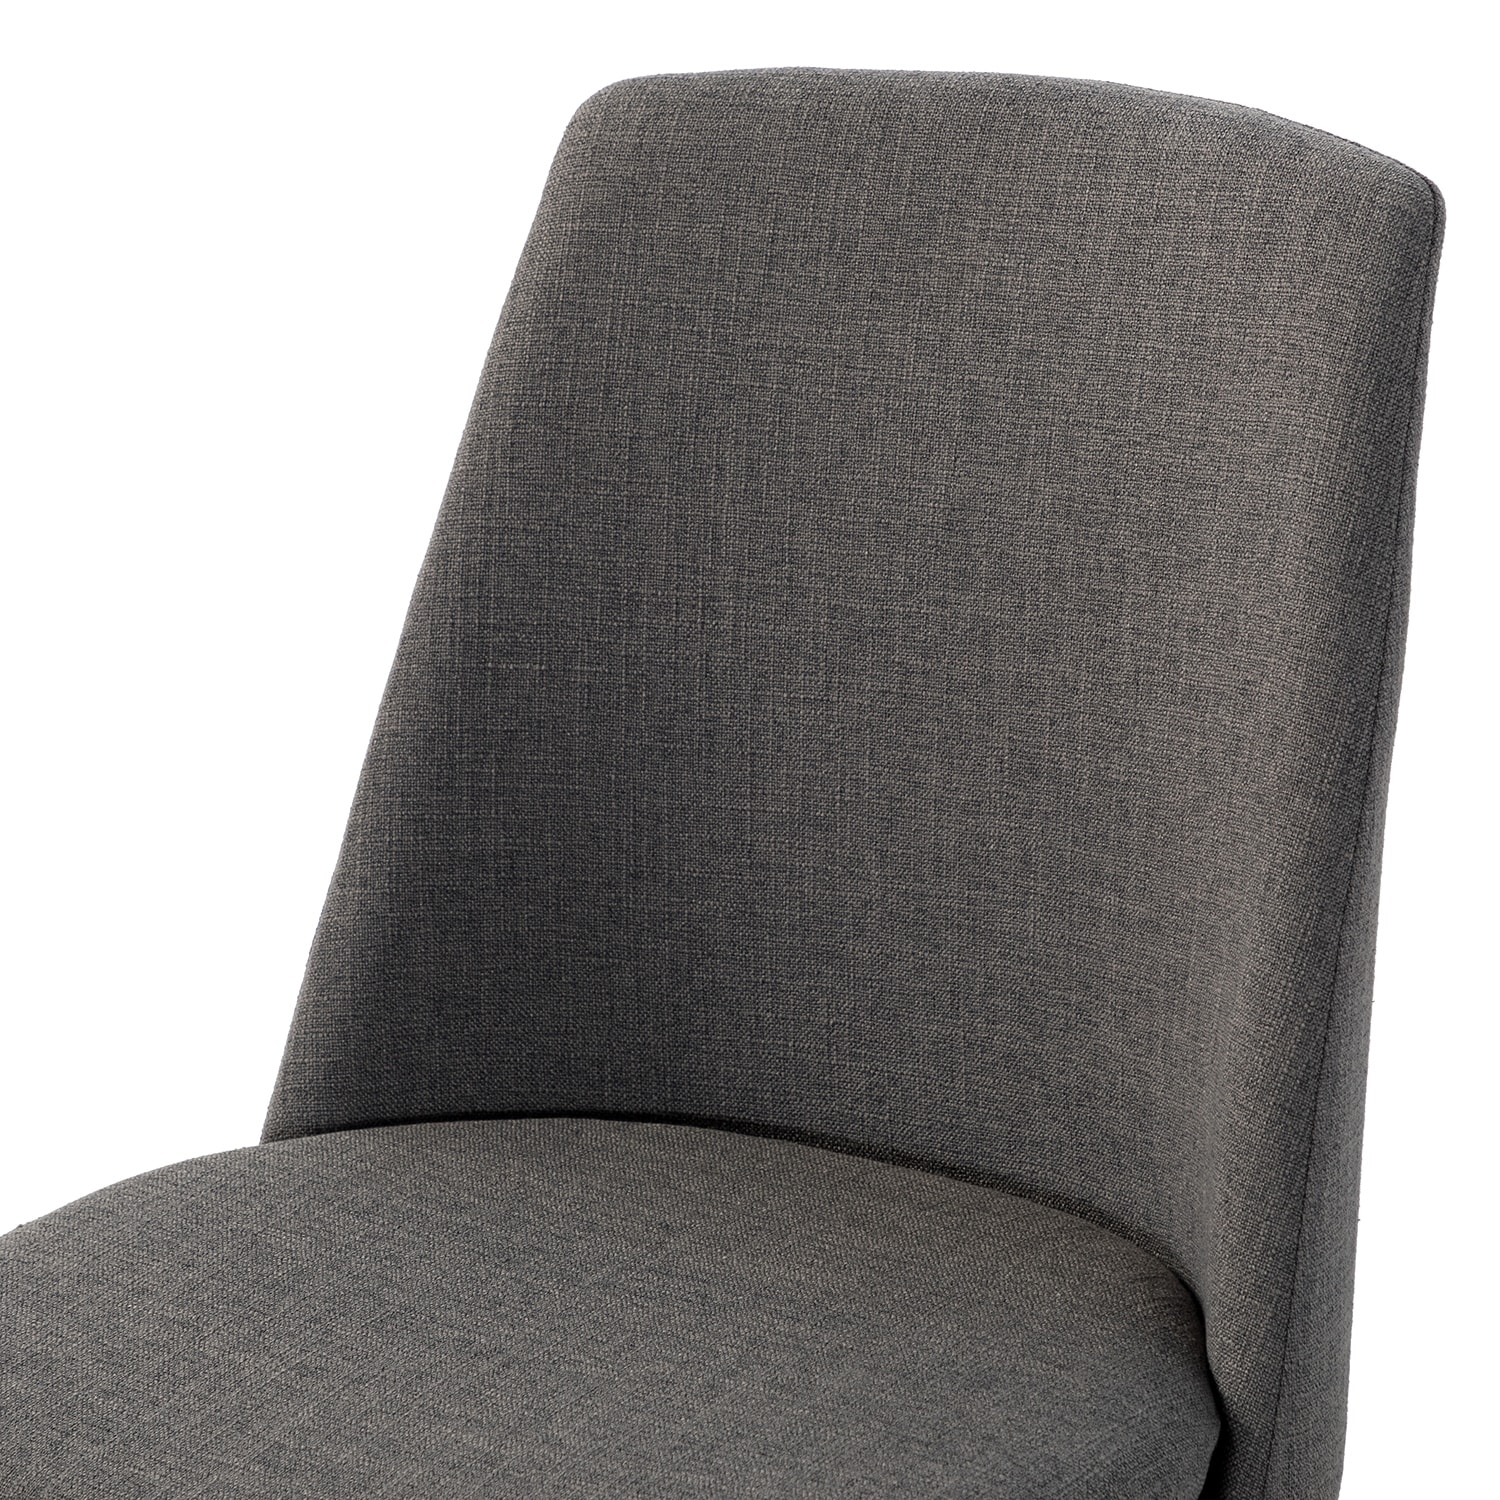 https://ak1.ostkcdn.com/images/products/is/images/direct/7df41480d43ec9b46a557c4f55fb8cf5f5201011/Homer-Modern-and-Contemporary-Side-Chairs-Set-of-2-with-Metal-Legs.jpg